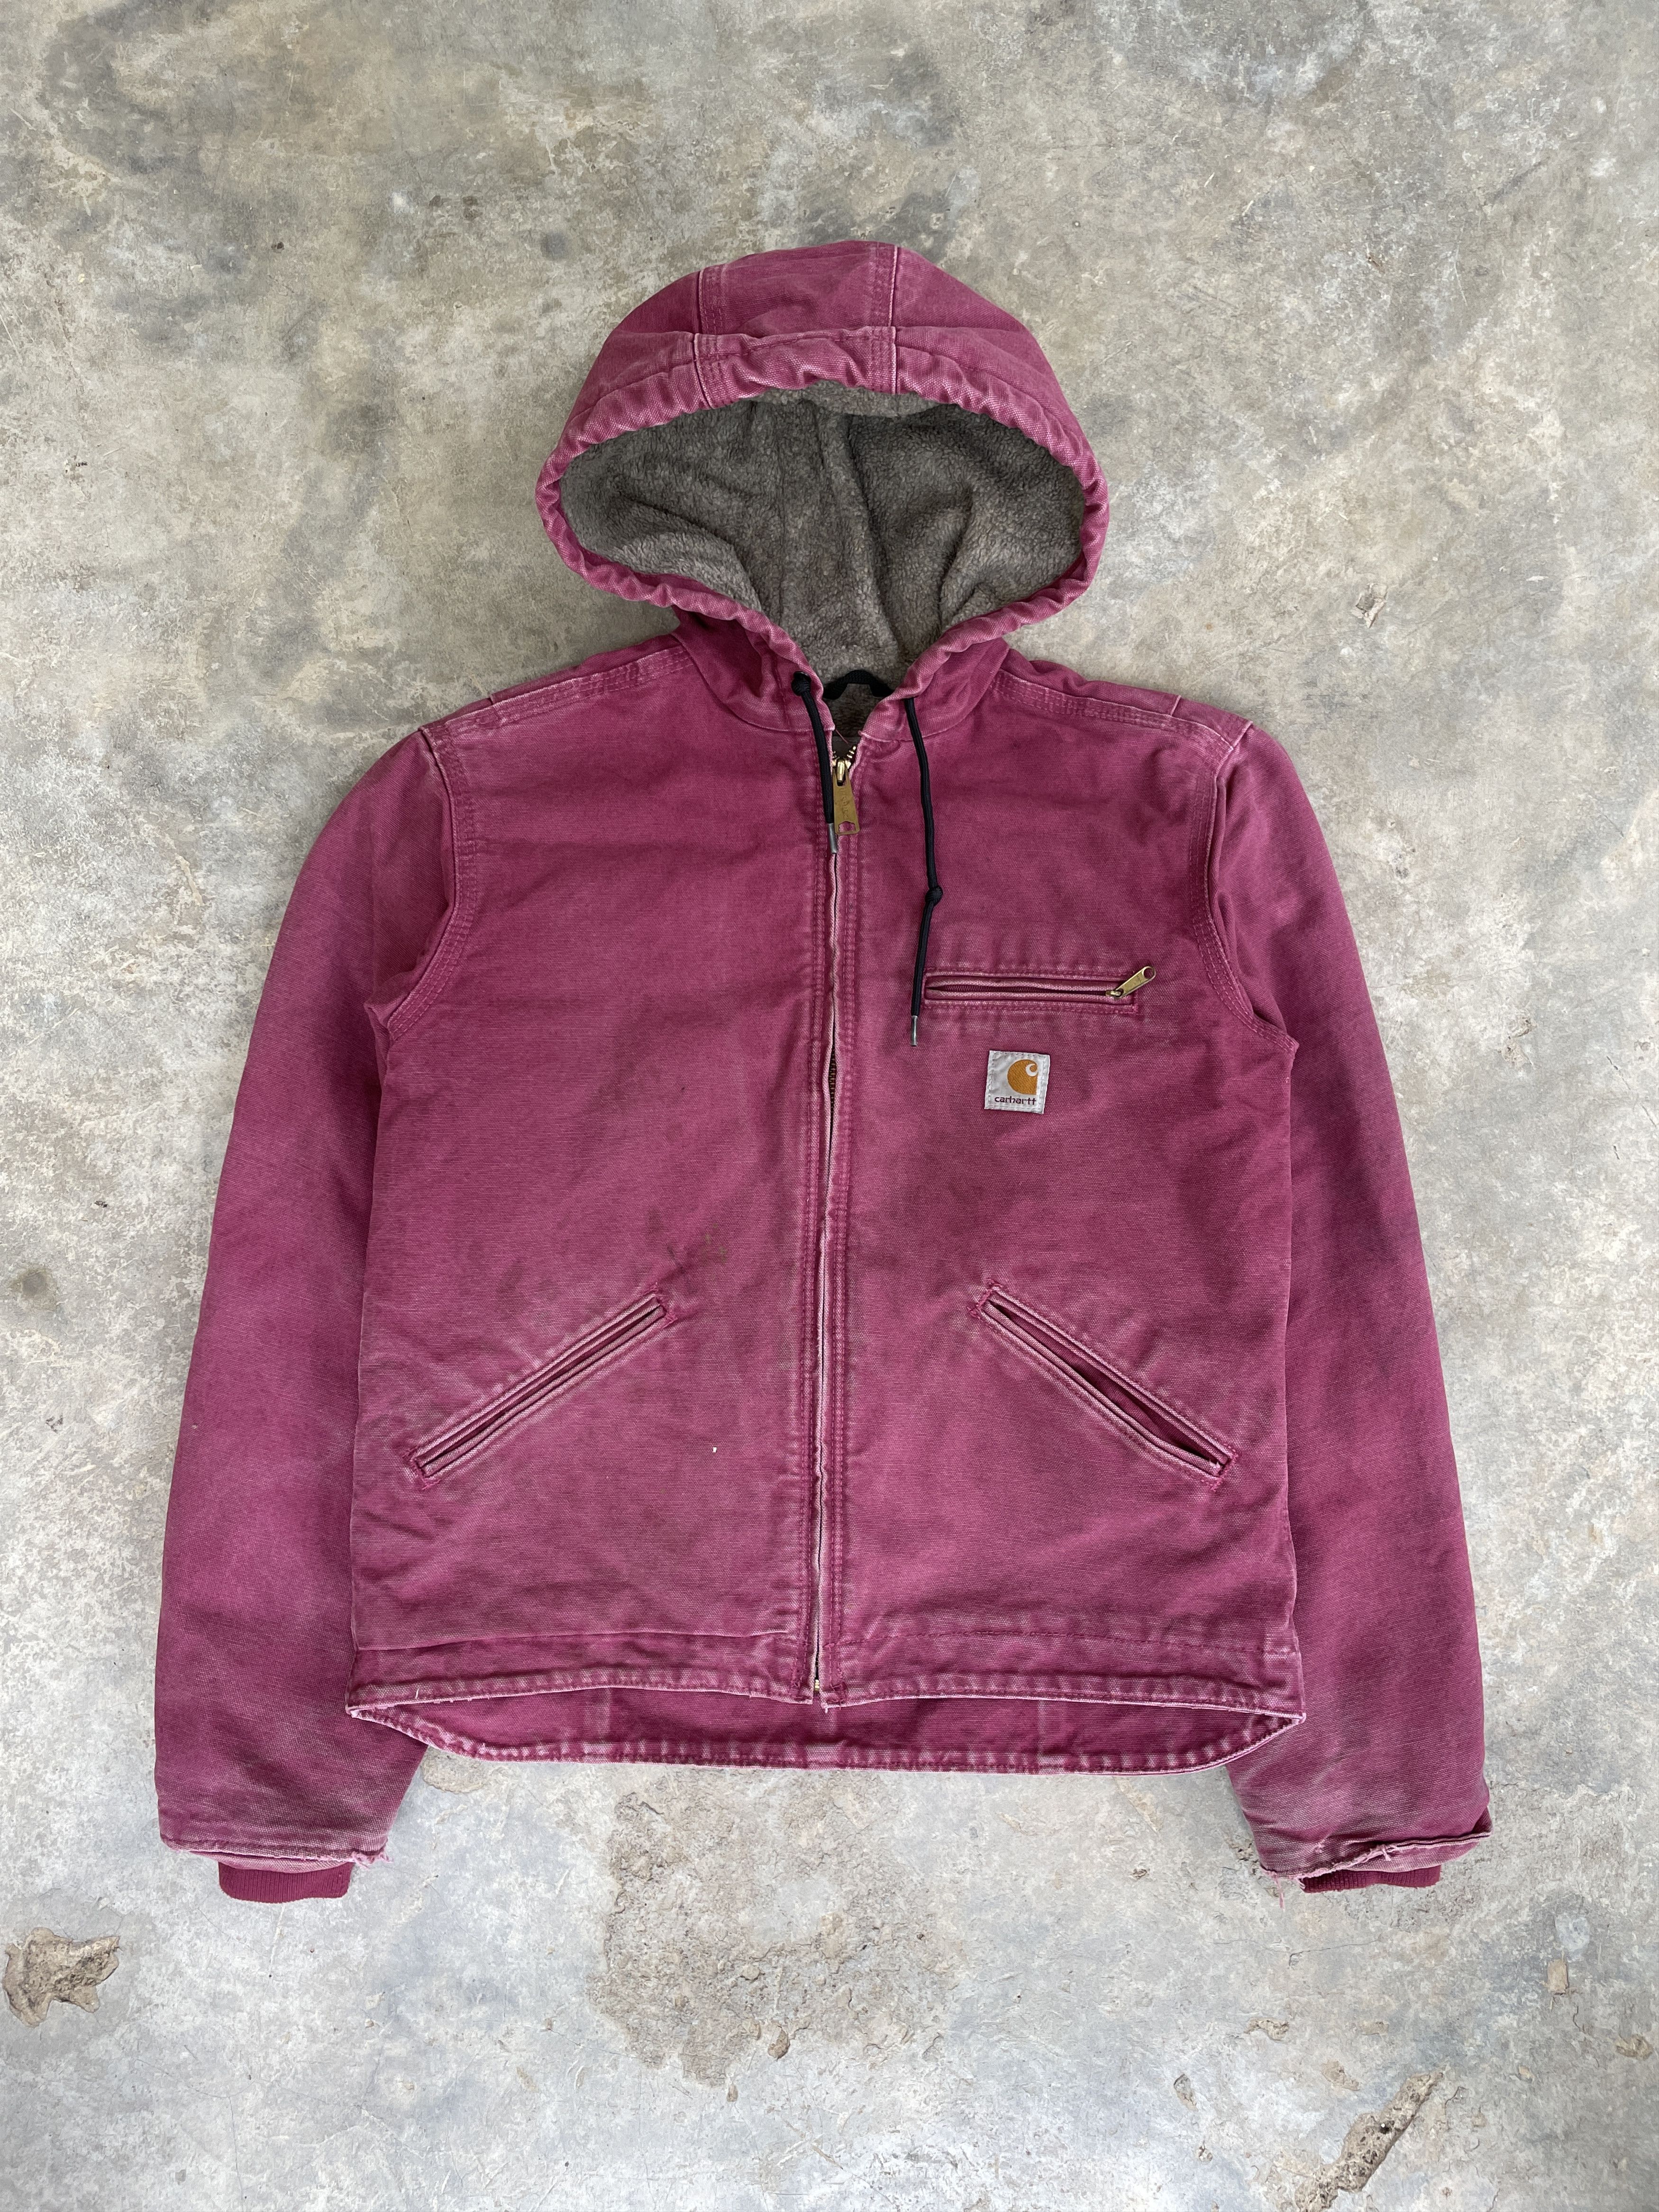 Vintage 1990s Sun Faded Pink Carhartt Jacket Size US S / EU 44-46 / 1 - 1 Preview